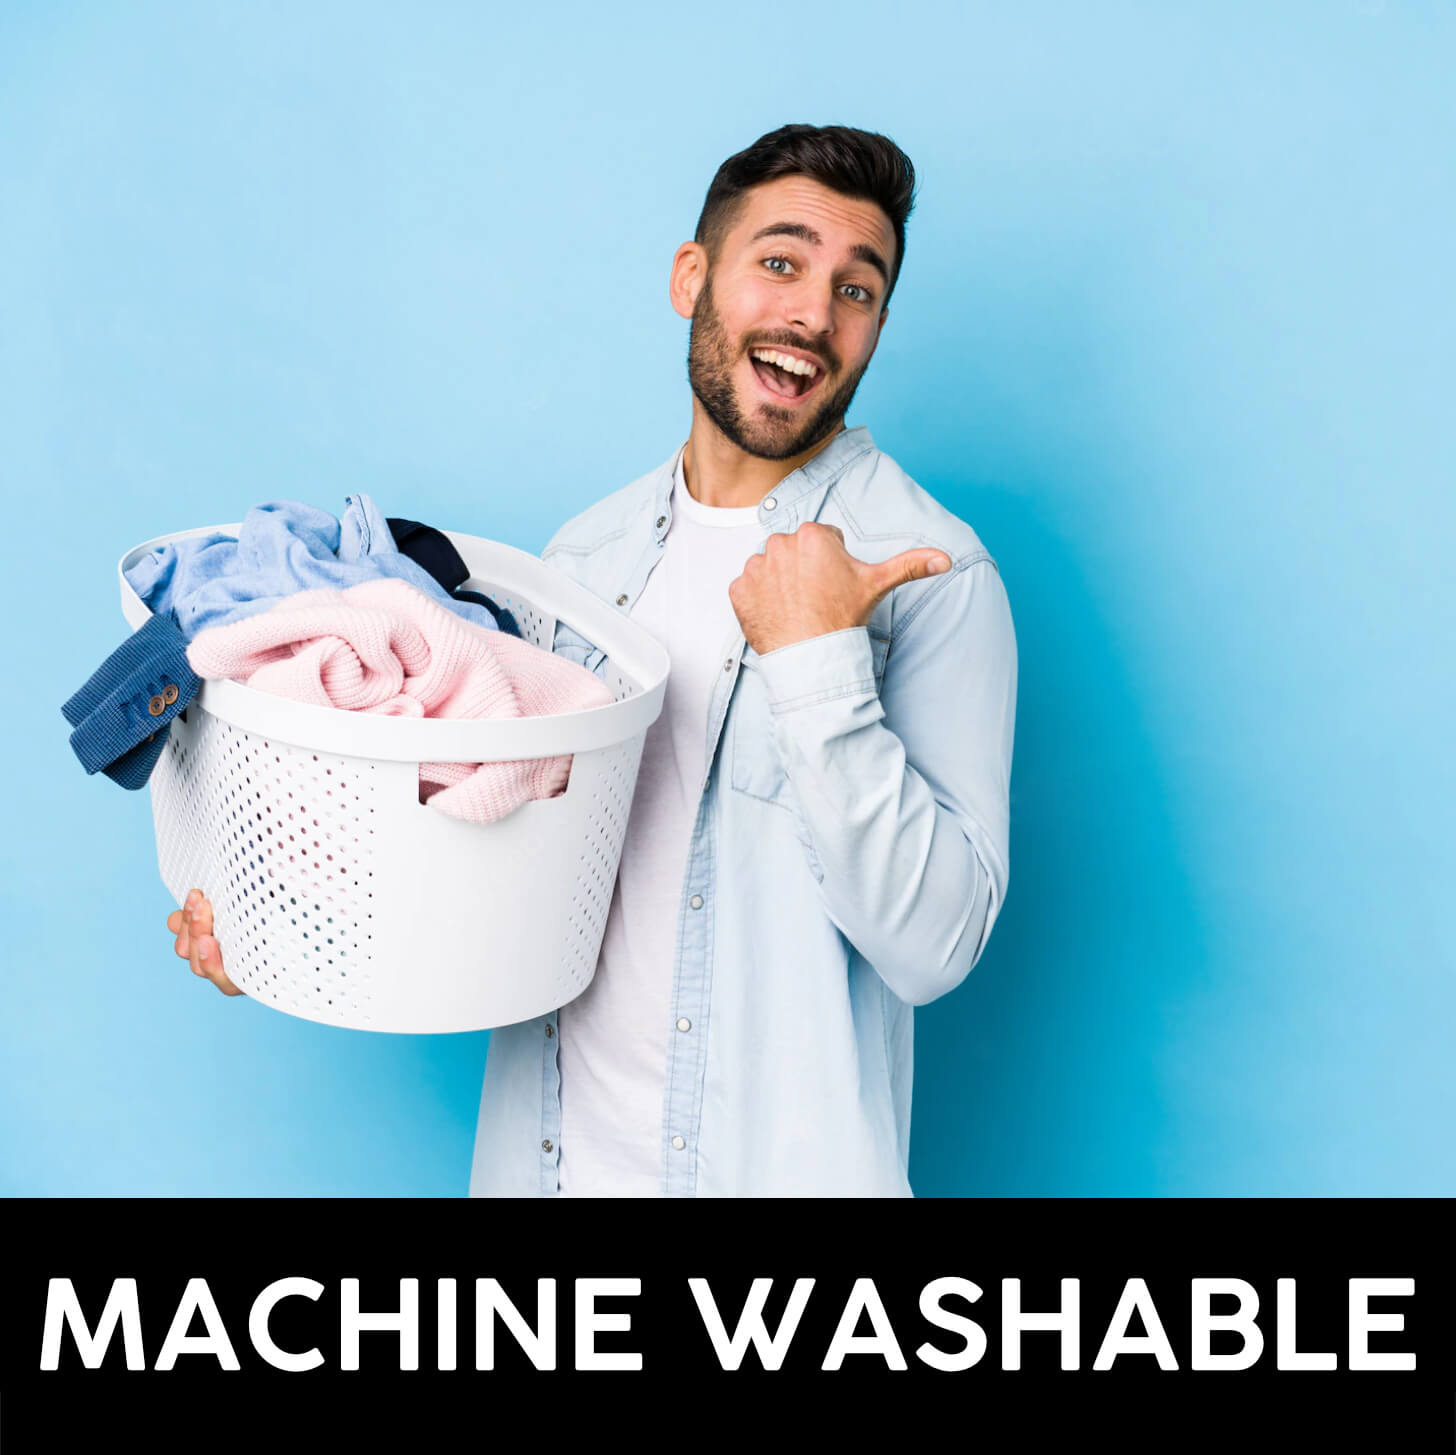 Machine Washable Clothing in Fun Colorful Vibrant Prints. No Fading, No Shrinking, Won't Lose it's Shape, Forever Soft and Bright! Shop ROCK ATOLL'S Print Based Clothing for Men and Women!